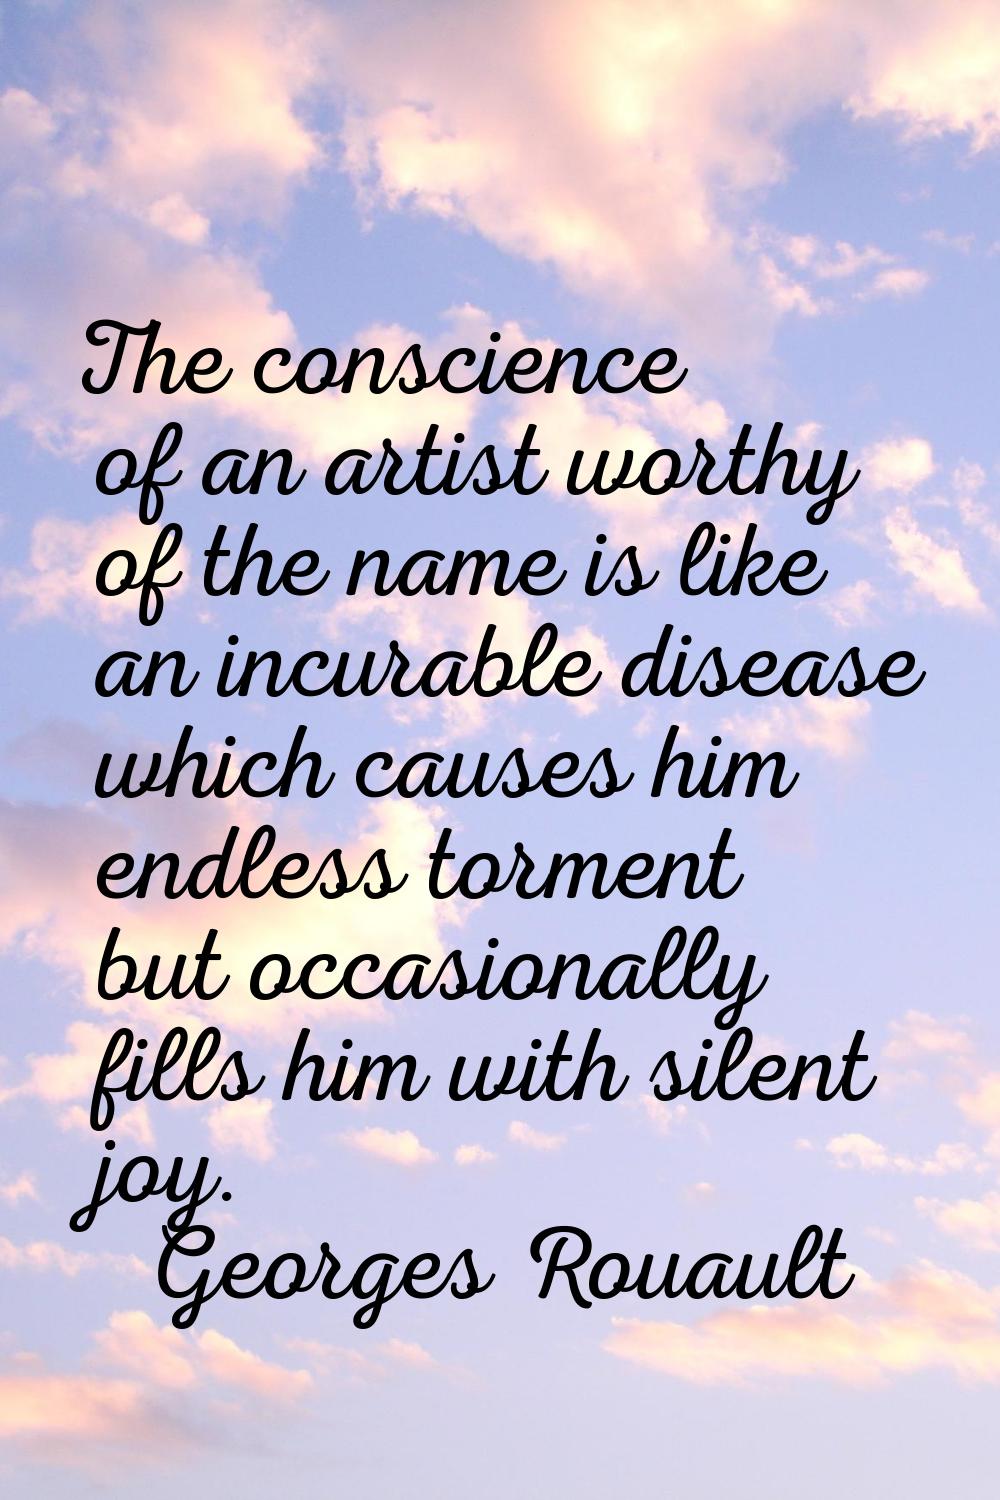 The conscience of an artist worthy of the name is like an incurable disease which causes him endles